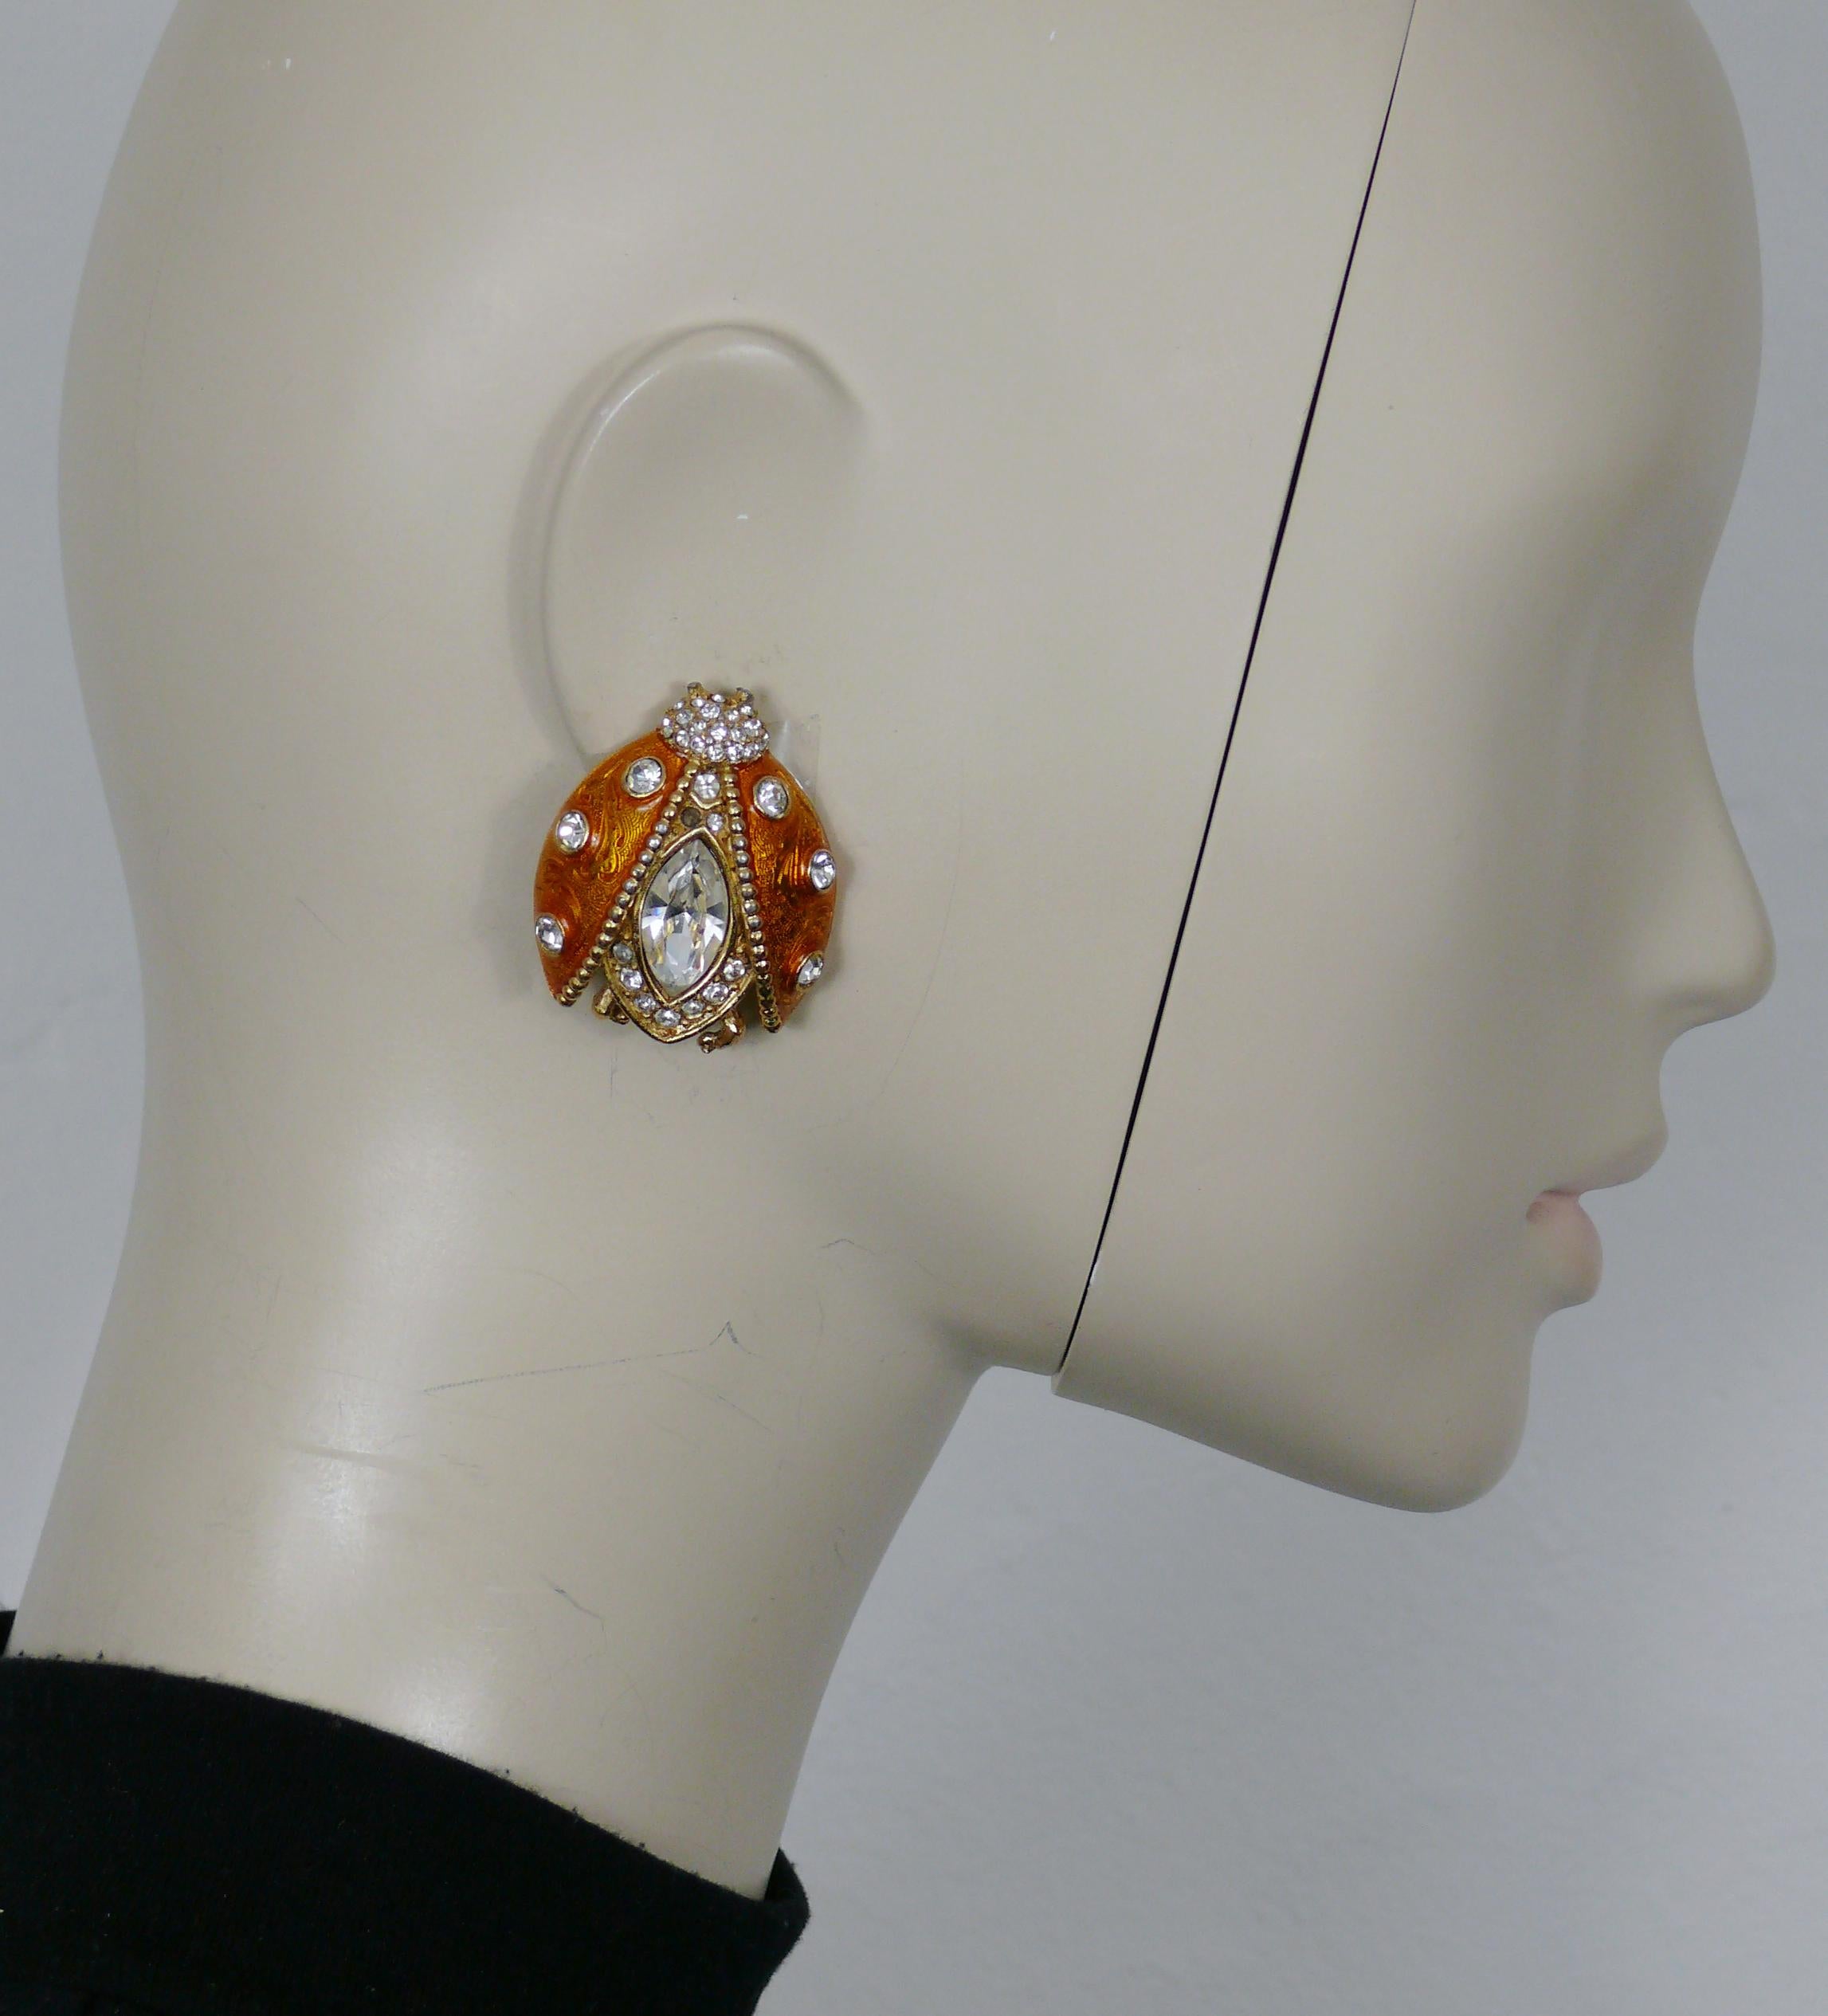 CHRISTIAN DIOR iconic gold tone ladybug clip-on earrings embellished with orange enamel and clear crystals.

Marked CHRISTIAN DIOR Boutique.

Indicative measurements : max. height approx 3.9 cm (1.54 inches) / max. width approx. 3.3 cm (1.30